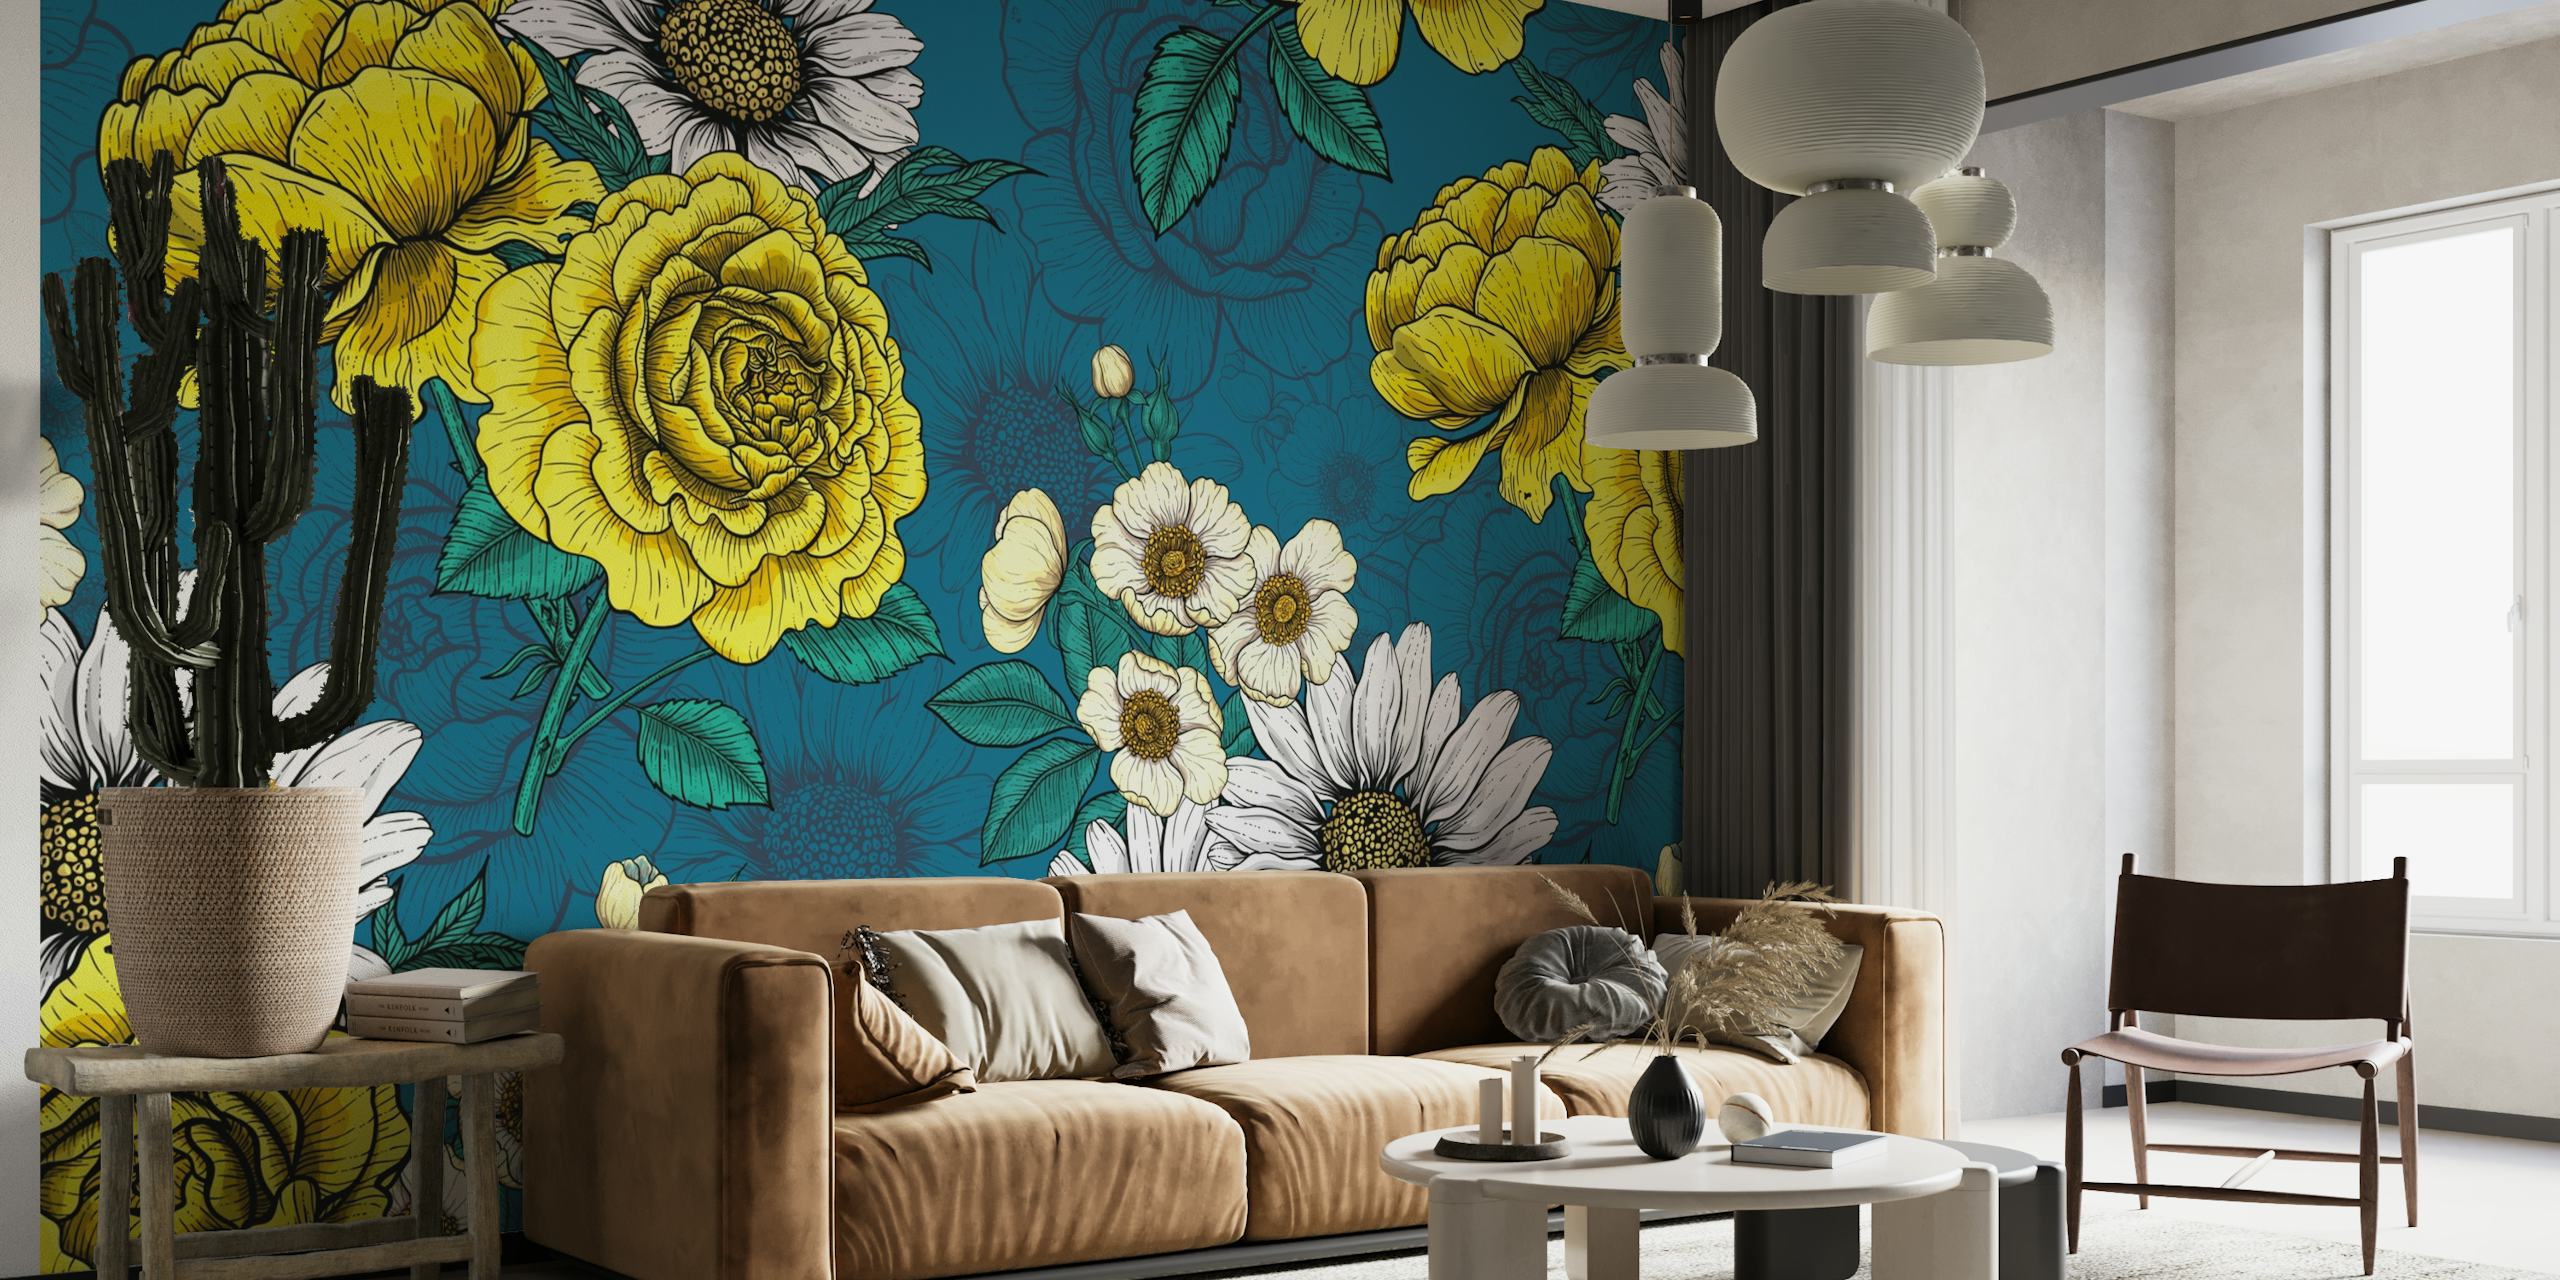 A floral wall mural with yellow roses and white daisies on a teal background.